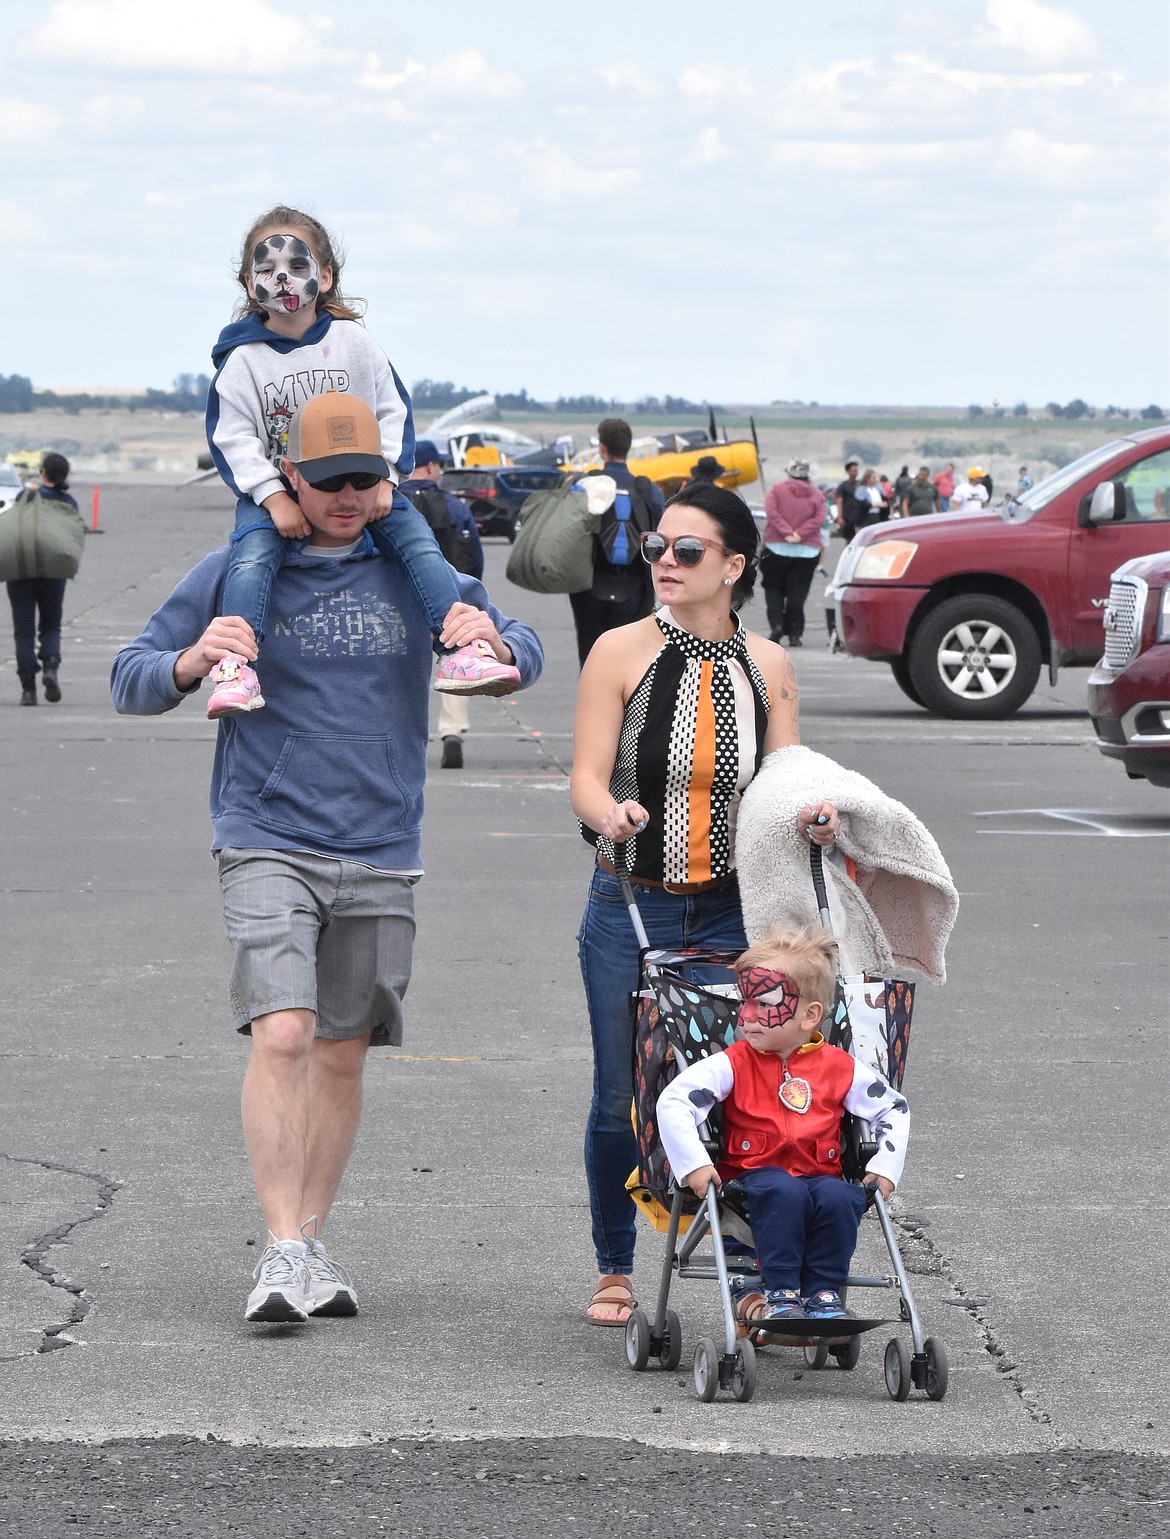 Aircraft weren’t sporting the only cool paint jobs at the Moses Lake Airshow. These two youngsters were painted up as a Dalmatian and Spiderman, respectively.